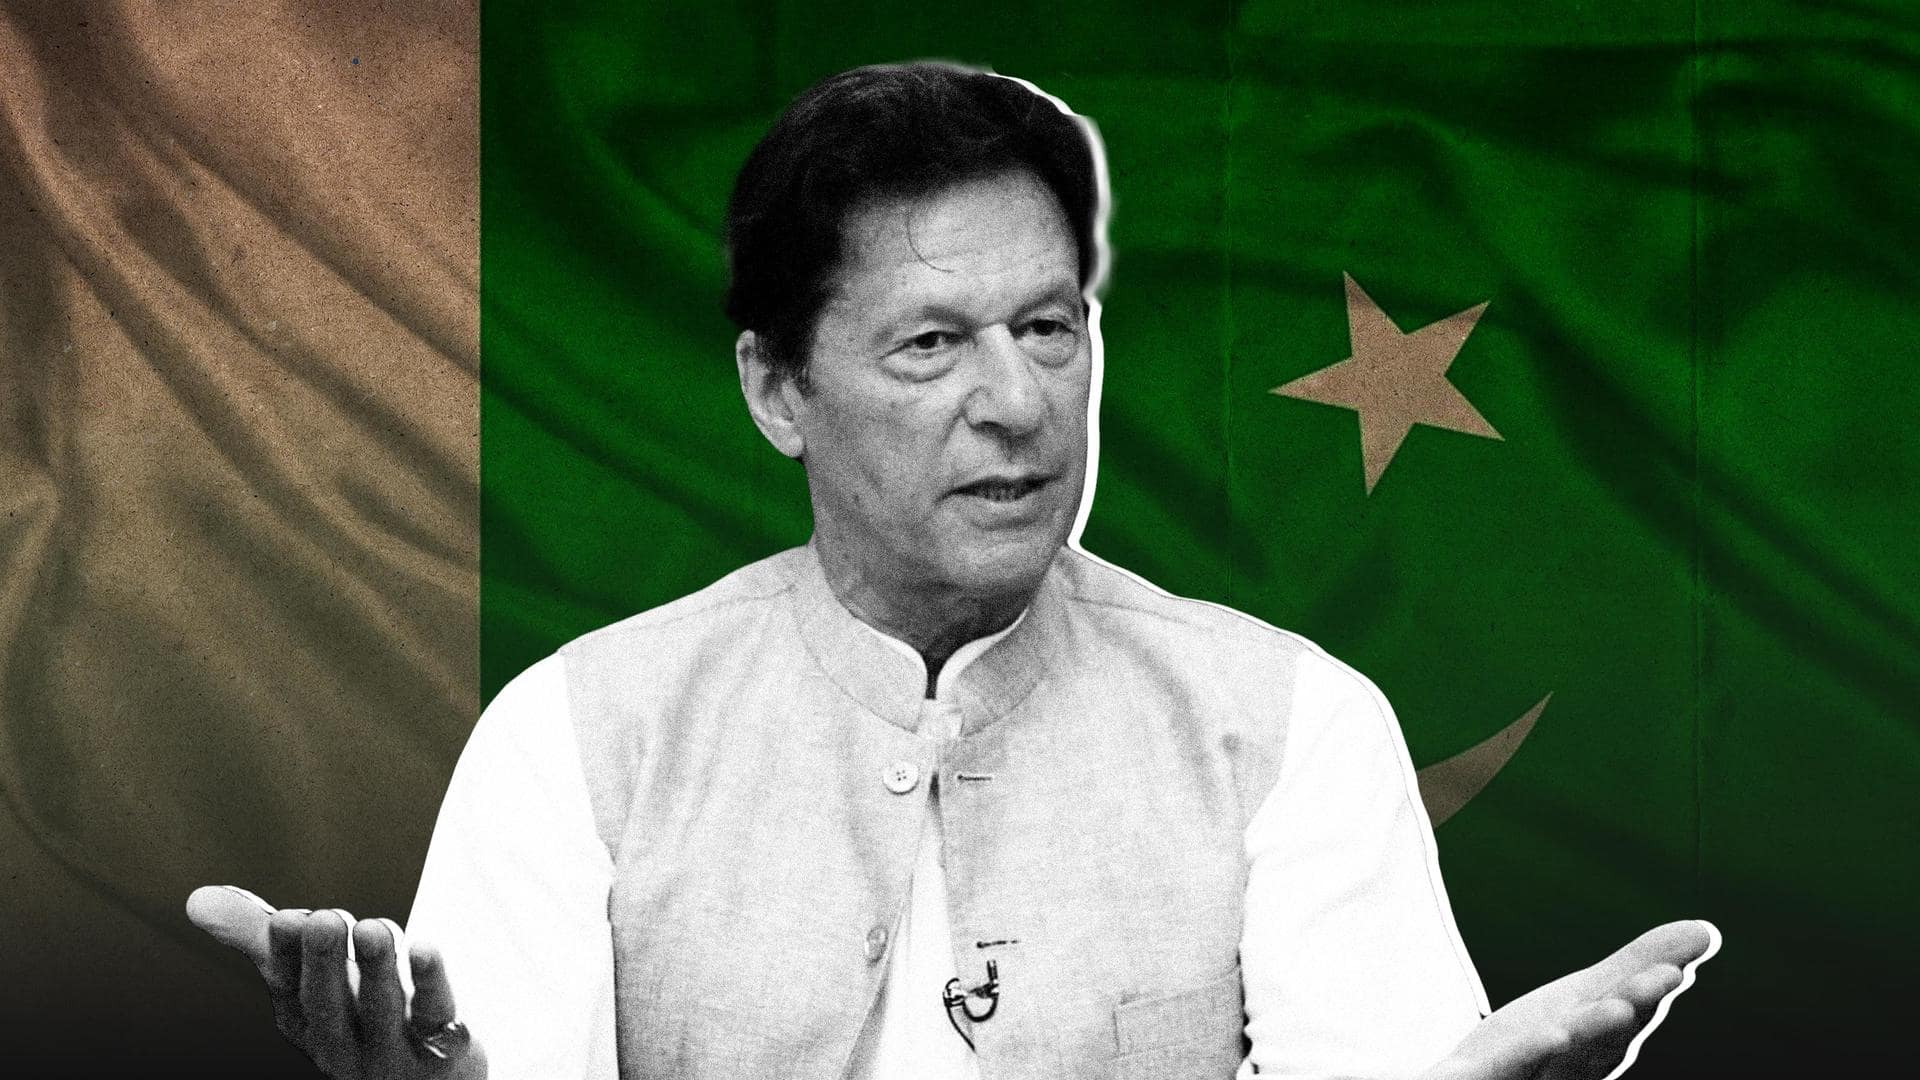 Either Imran Khan or we will get murdered: Pakistan minister